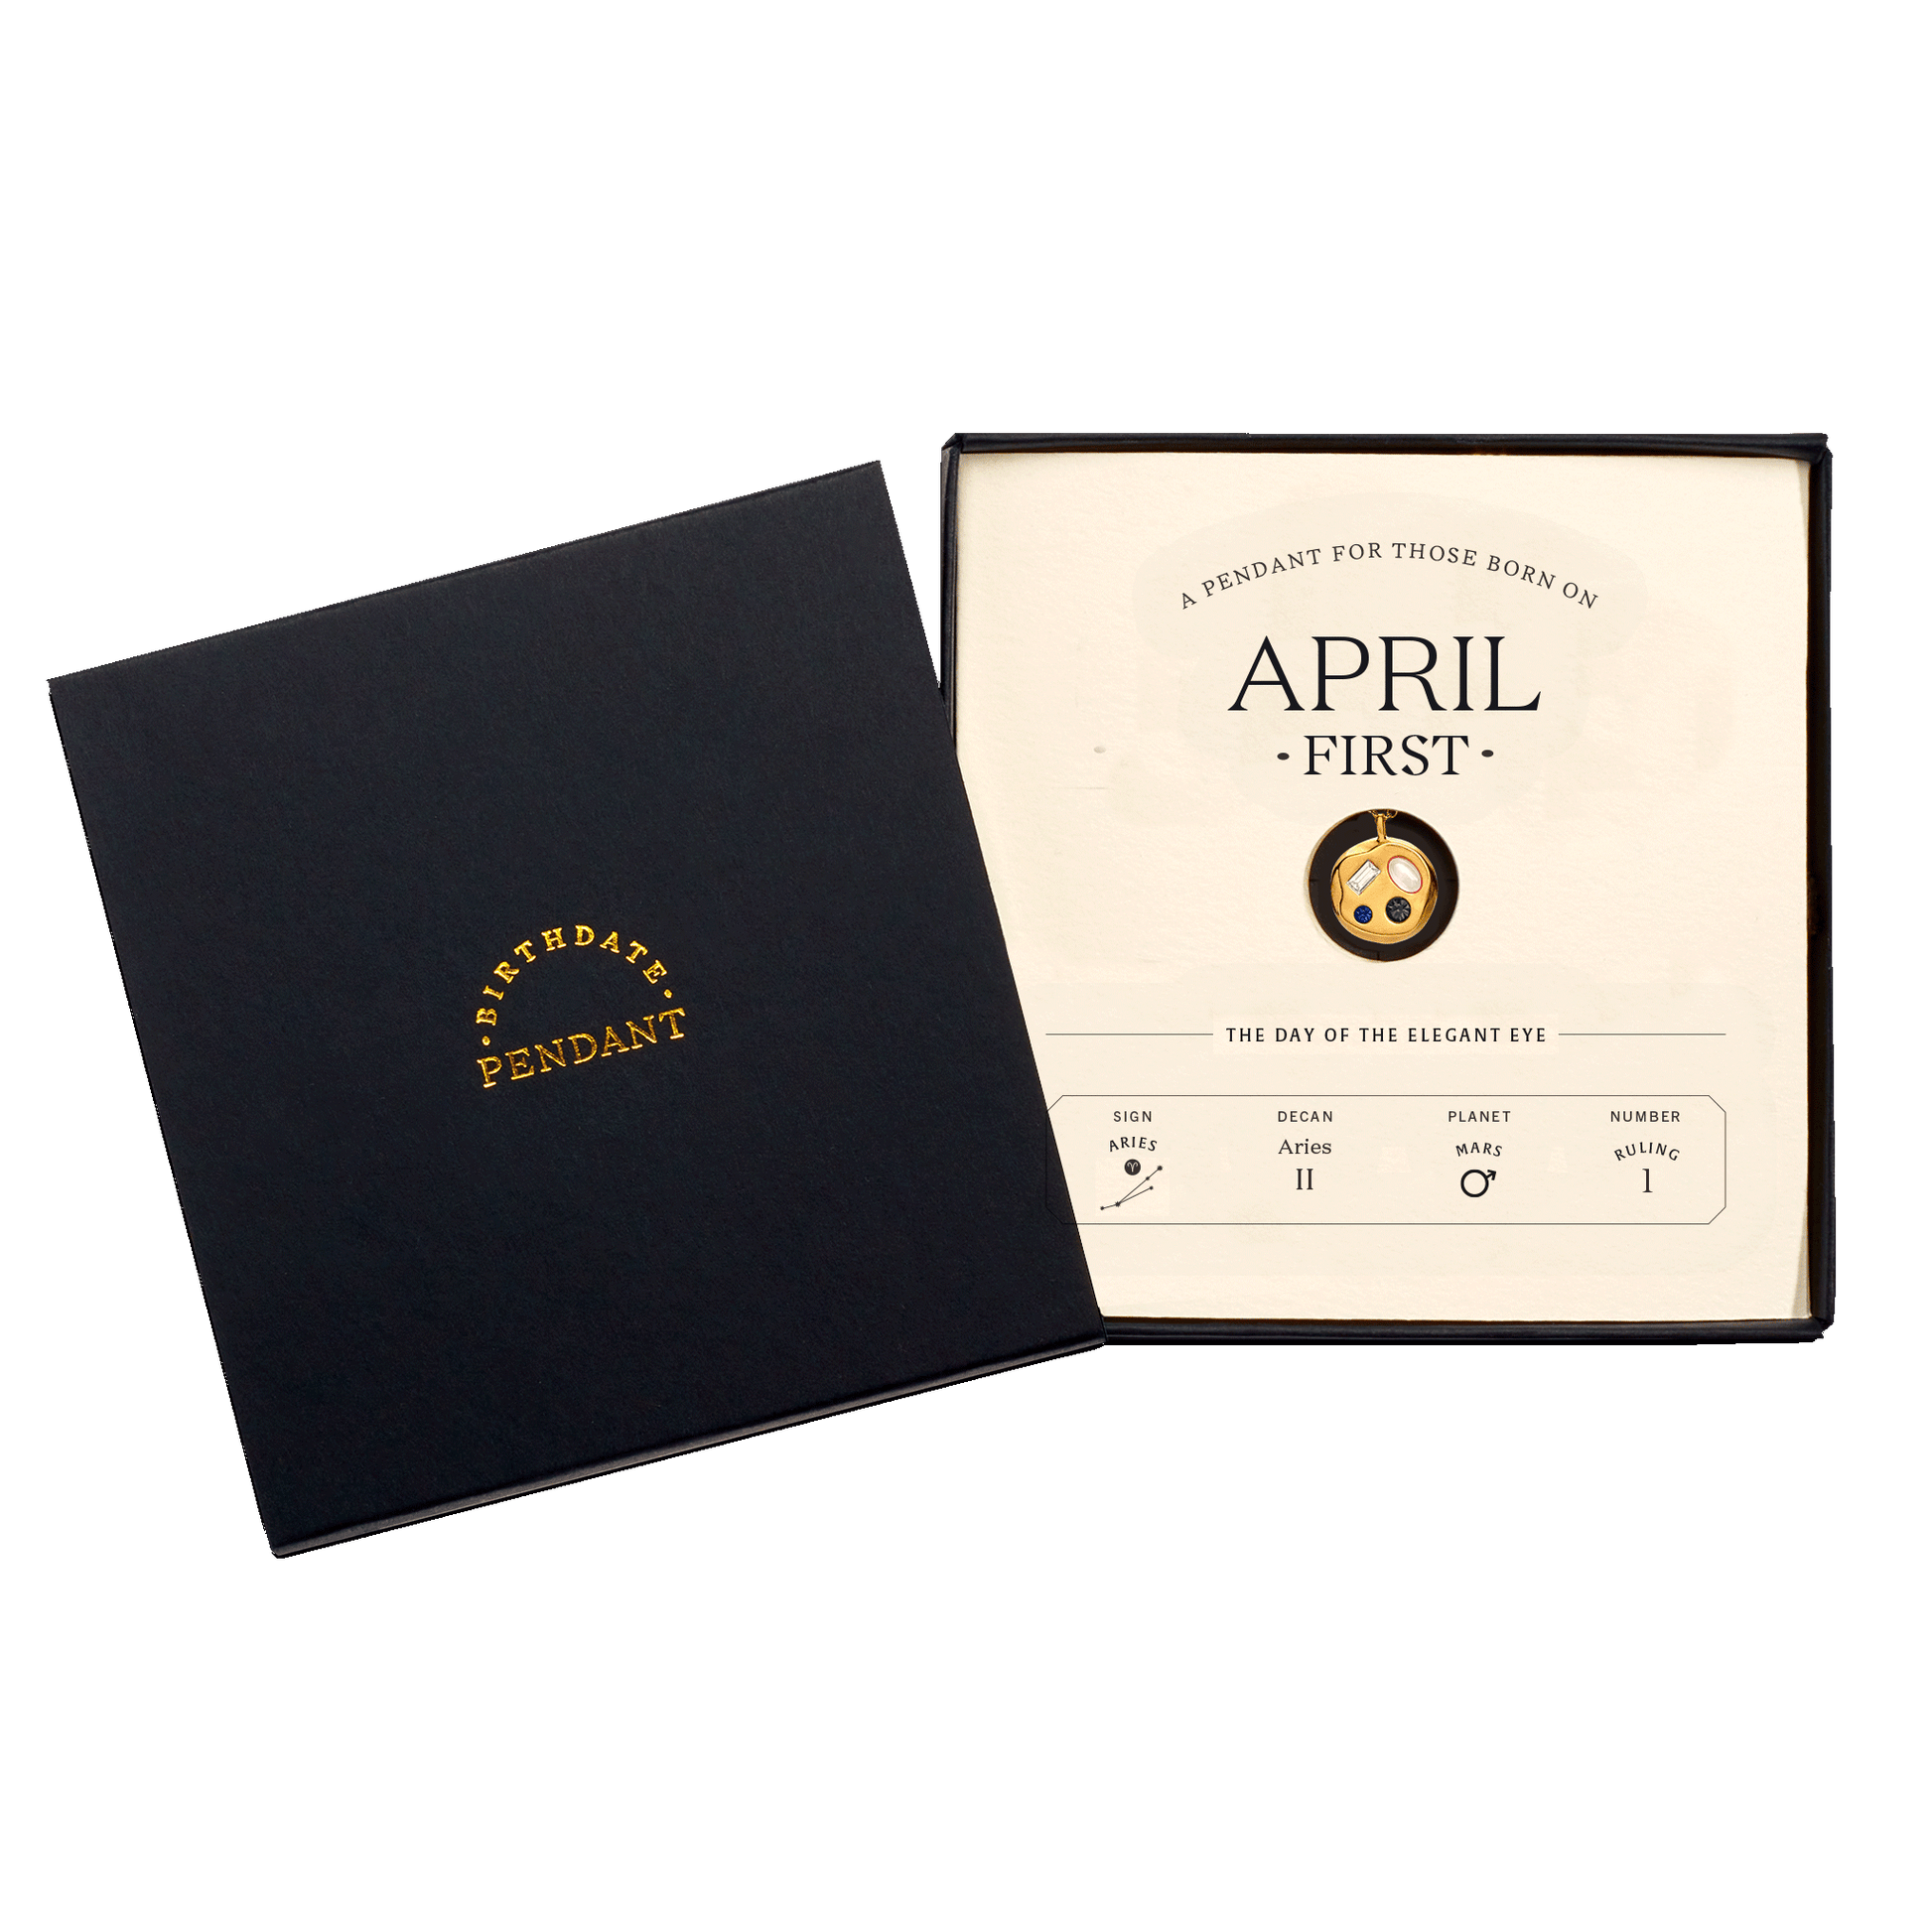 The April First Pendant inside its box